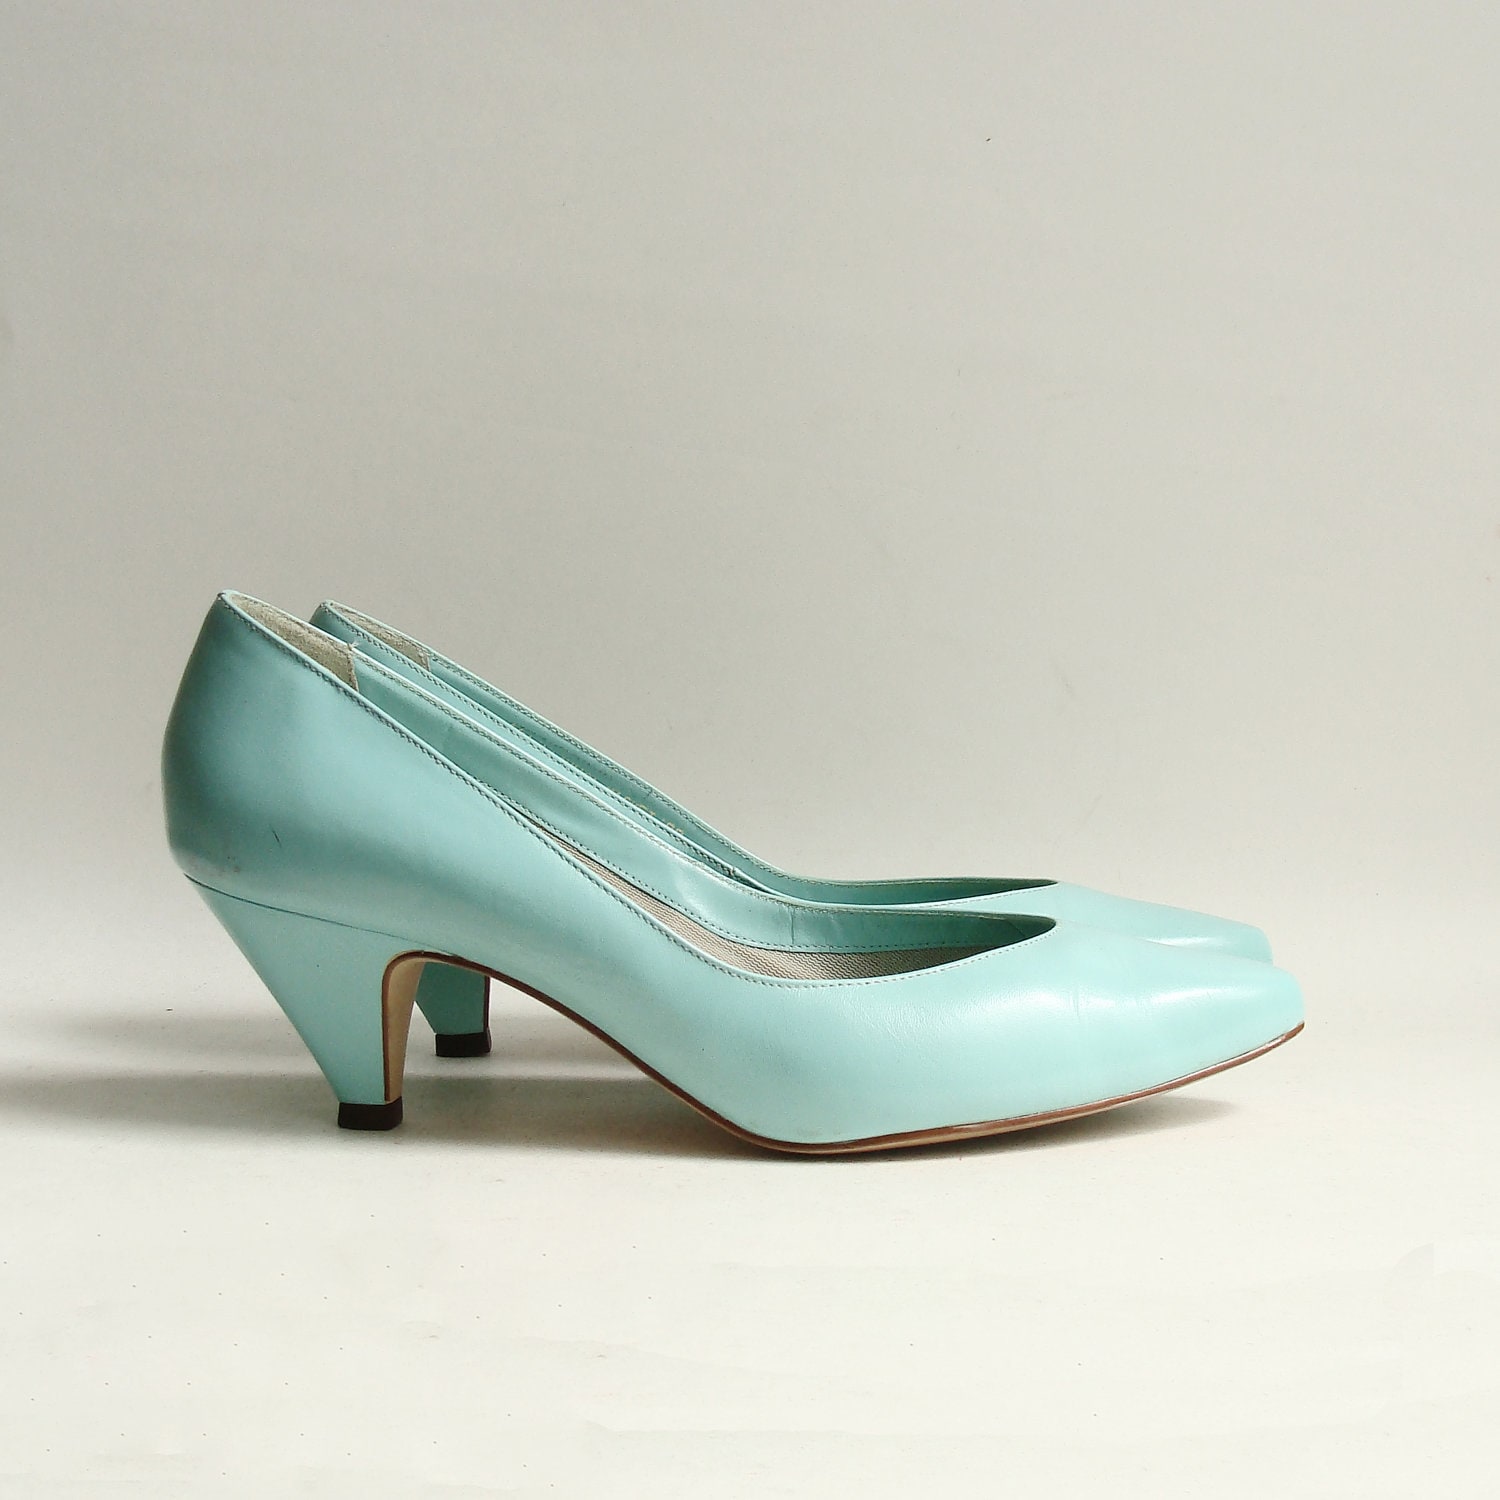 shoes 8 / seafoam green heels / 80s 1980s turquoise new wave